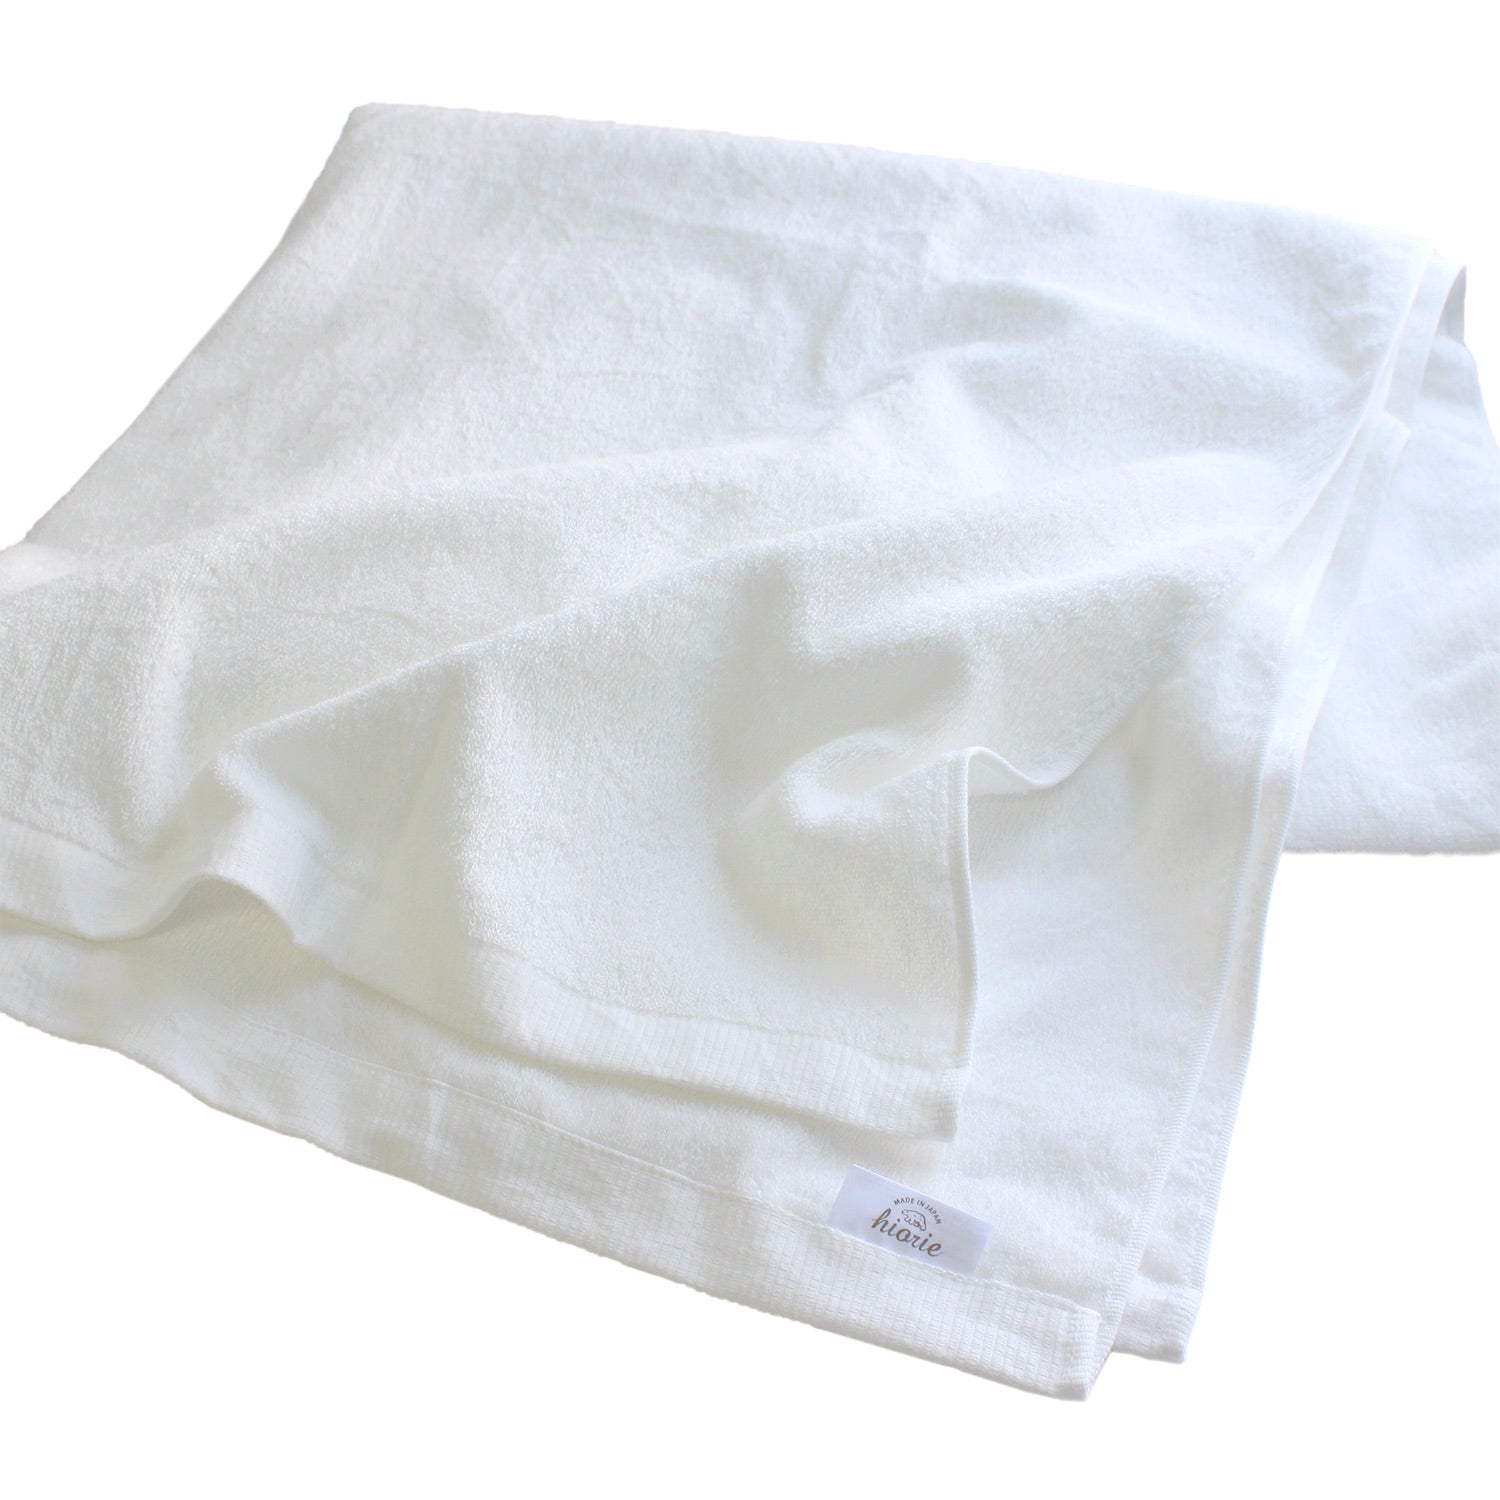 [Limited edition]Special Deal Hiorie Hotel Soft WaterAbsorption Large Bath towel